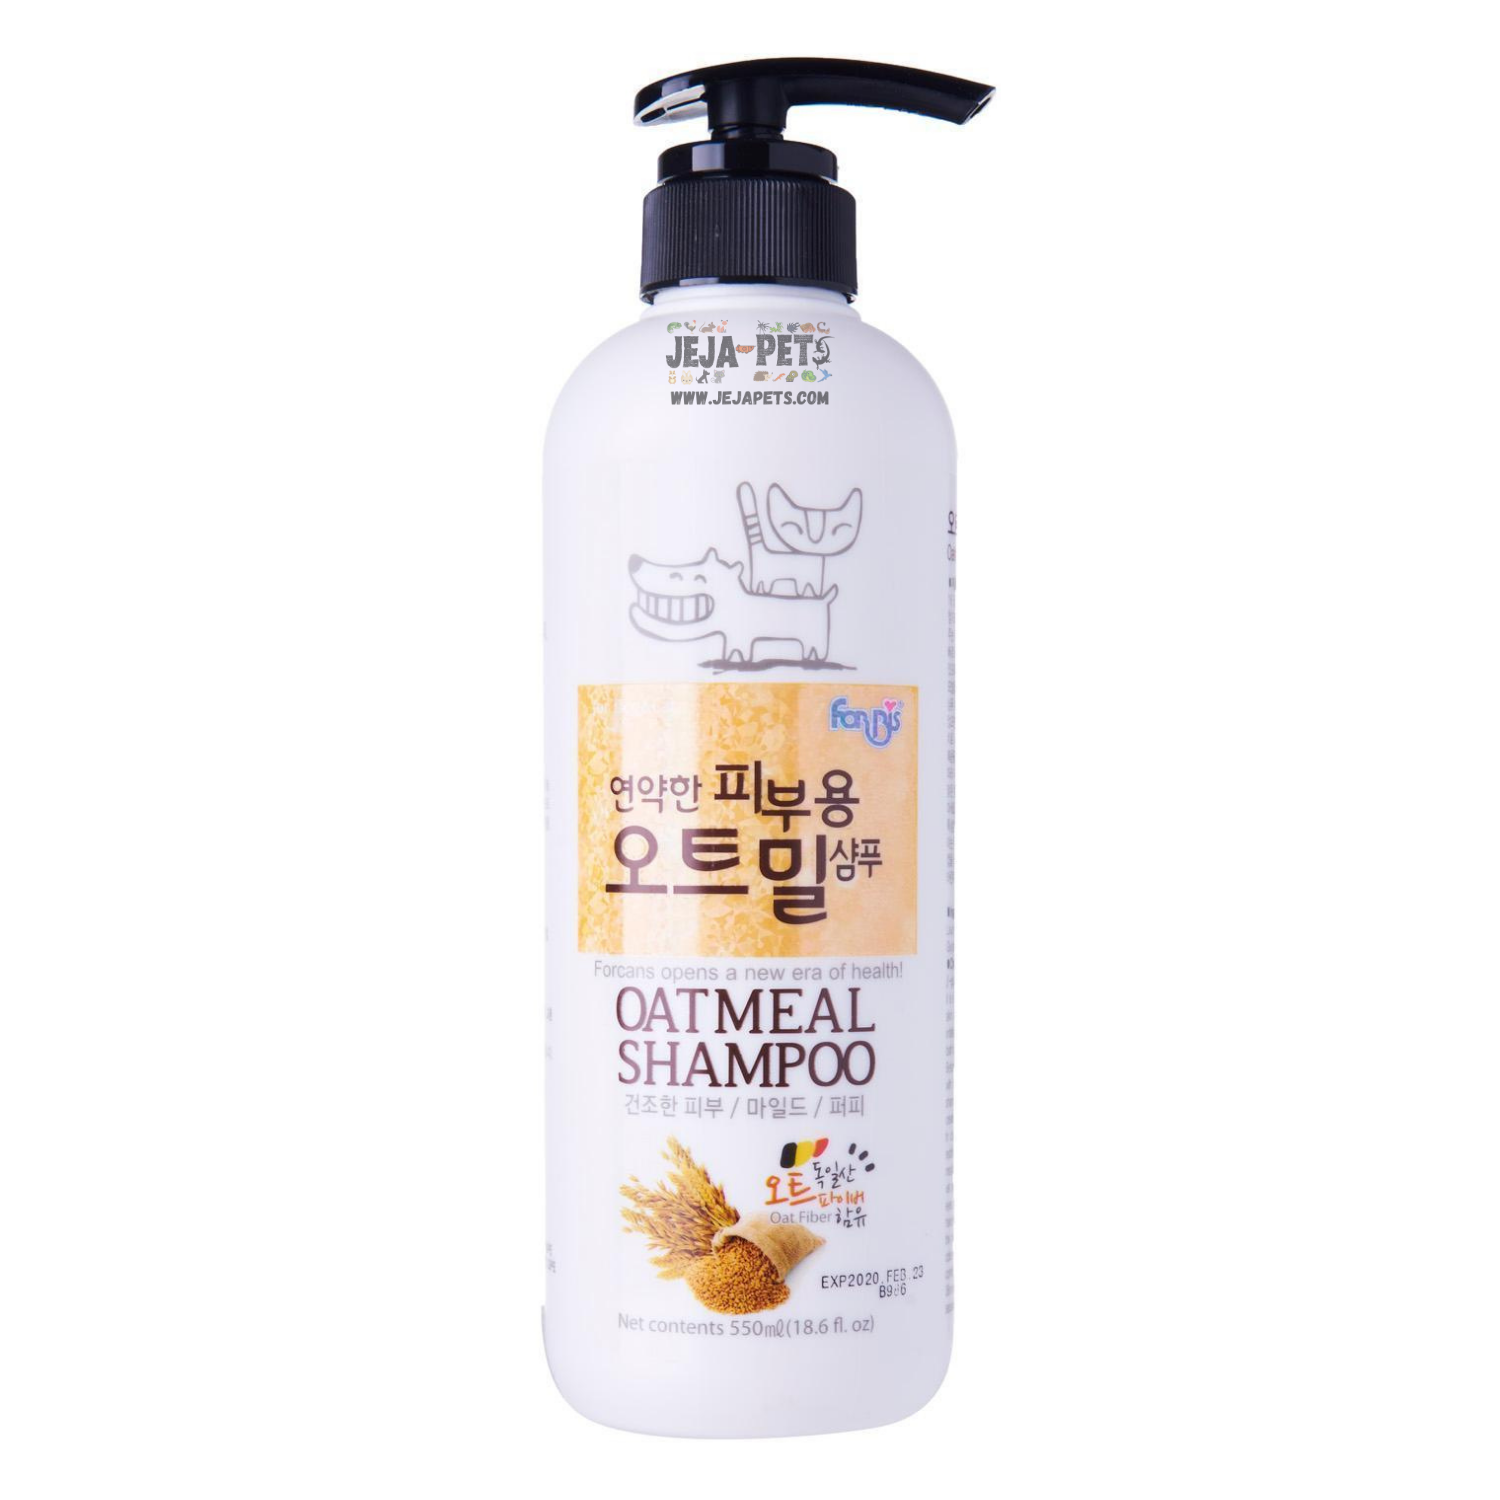 Forbis Forcans Oatmeal Shampoo for Dogs and Cats - 550ml